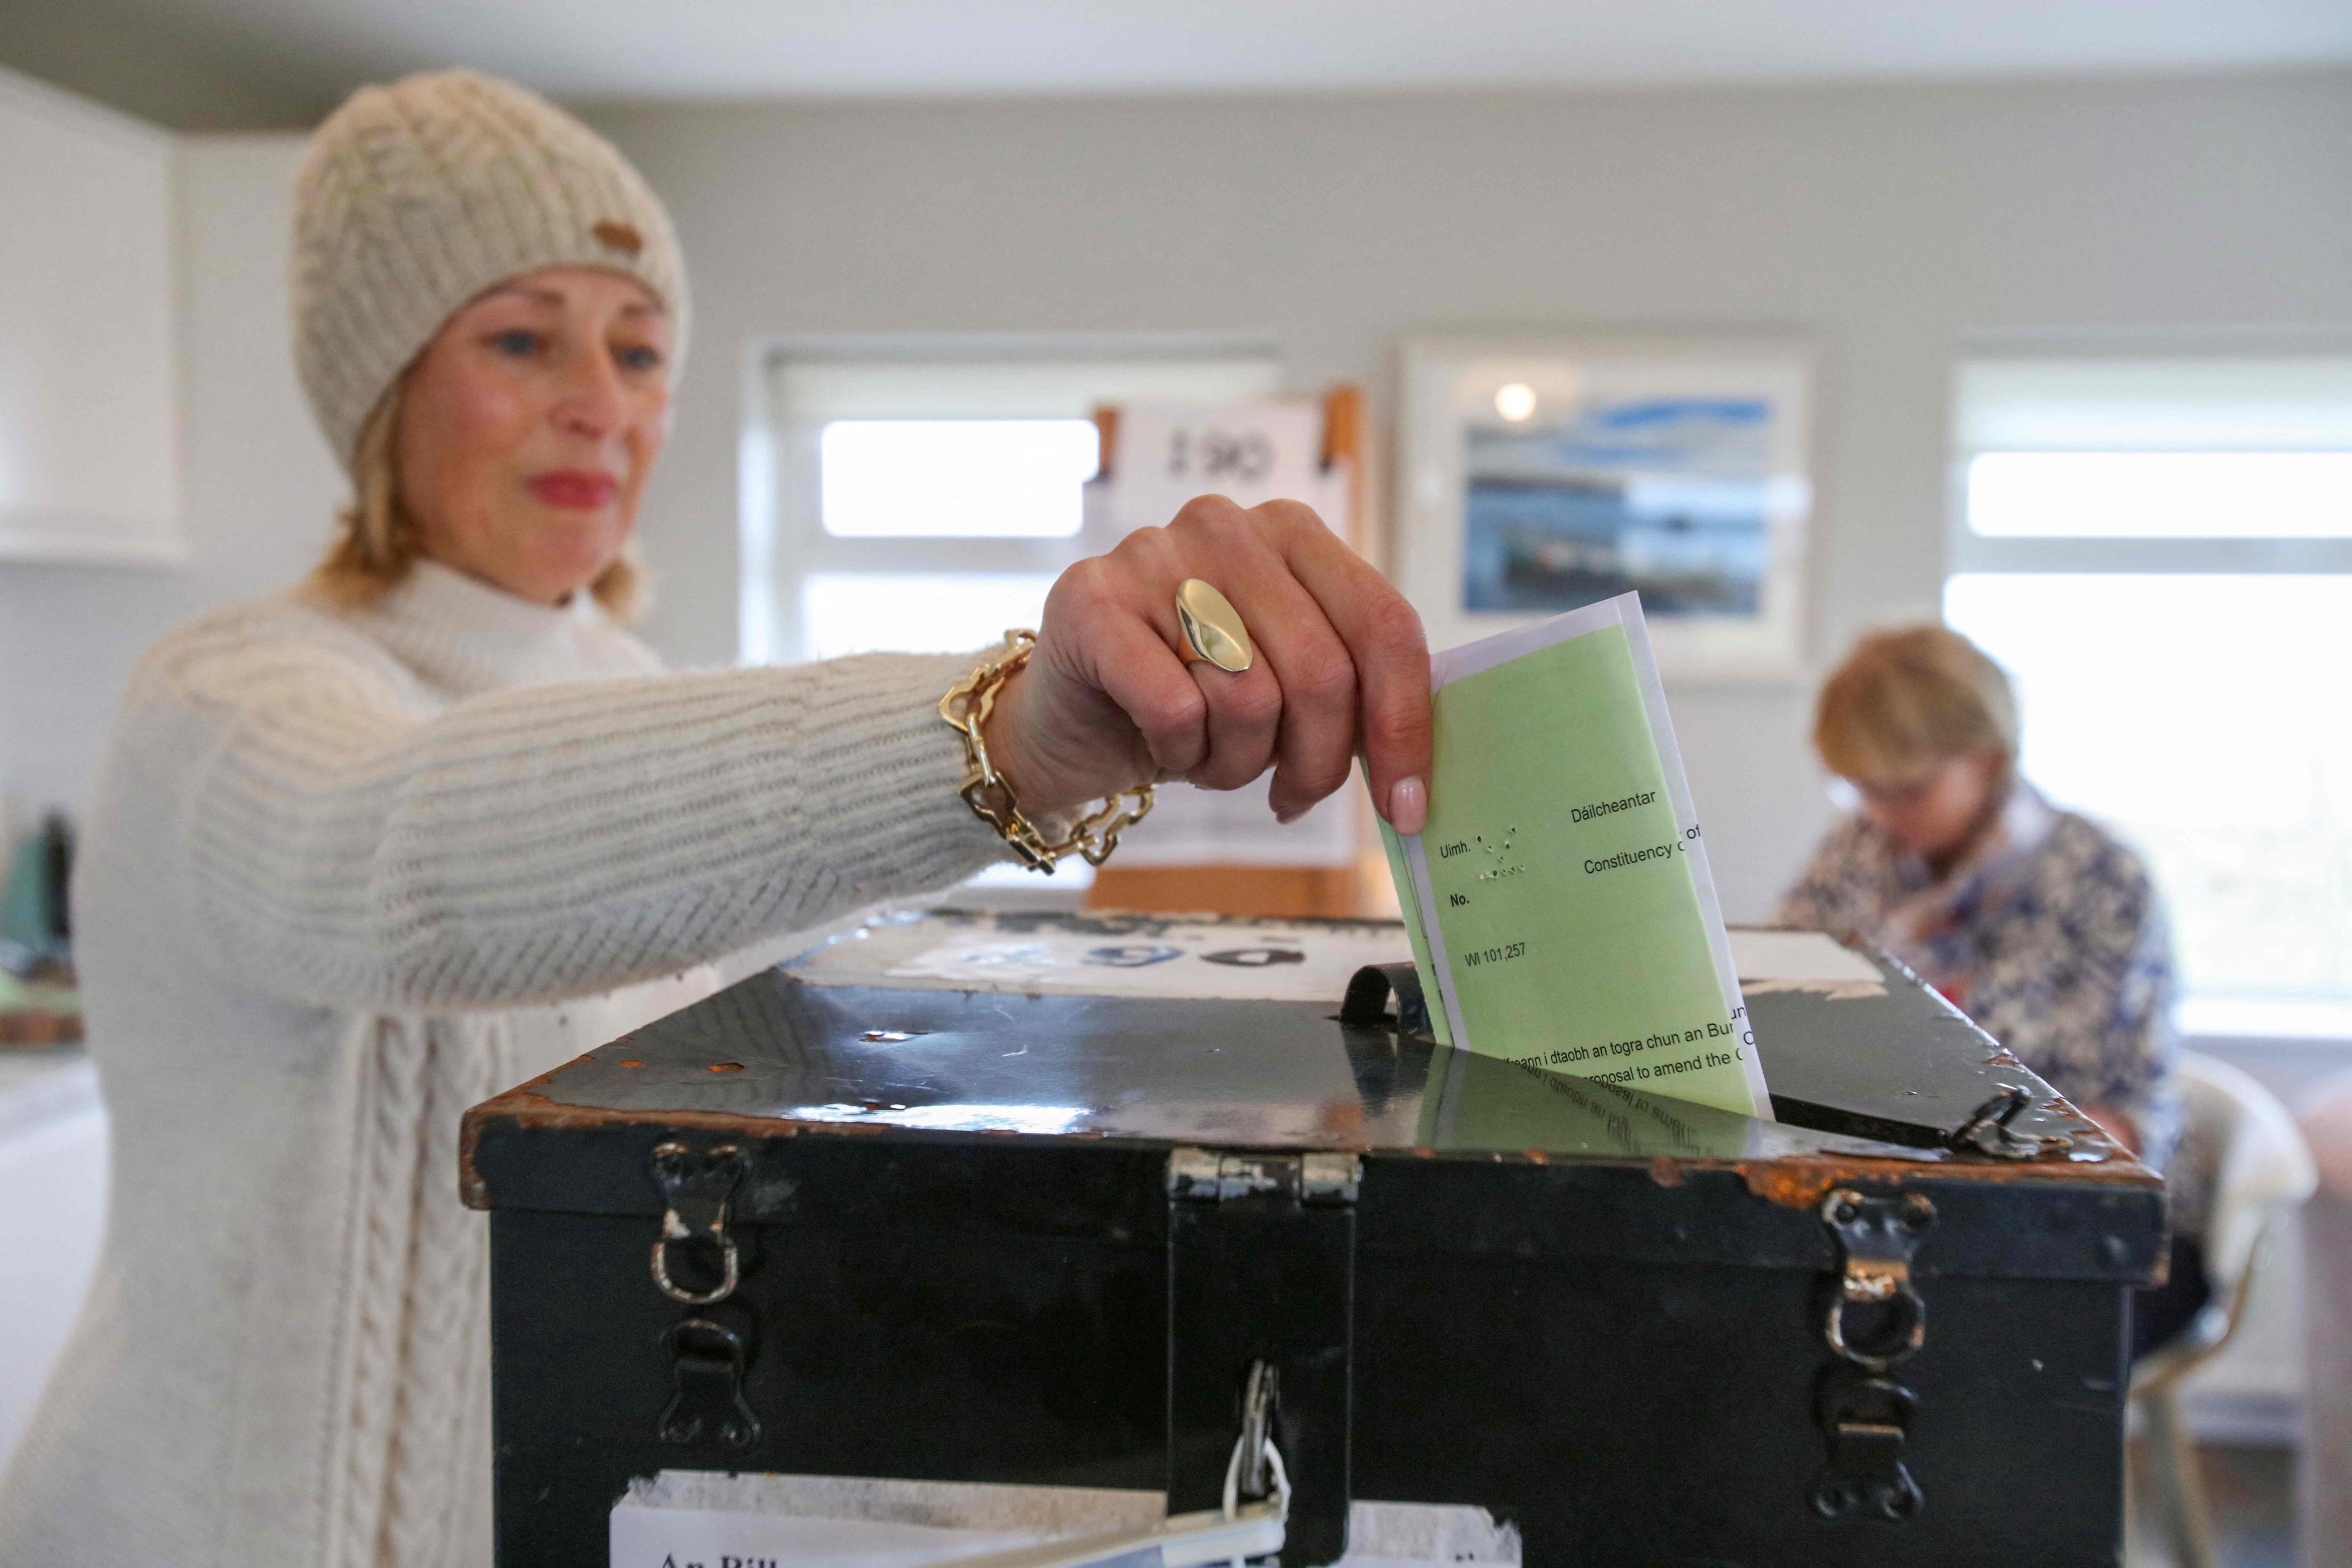 An Islander, Maria McSweeney casts her ballot on Gola Island, off the Donegal coast of western Ireland, in the Irish constitution referendum on Friday. Photo: AFP